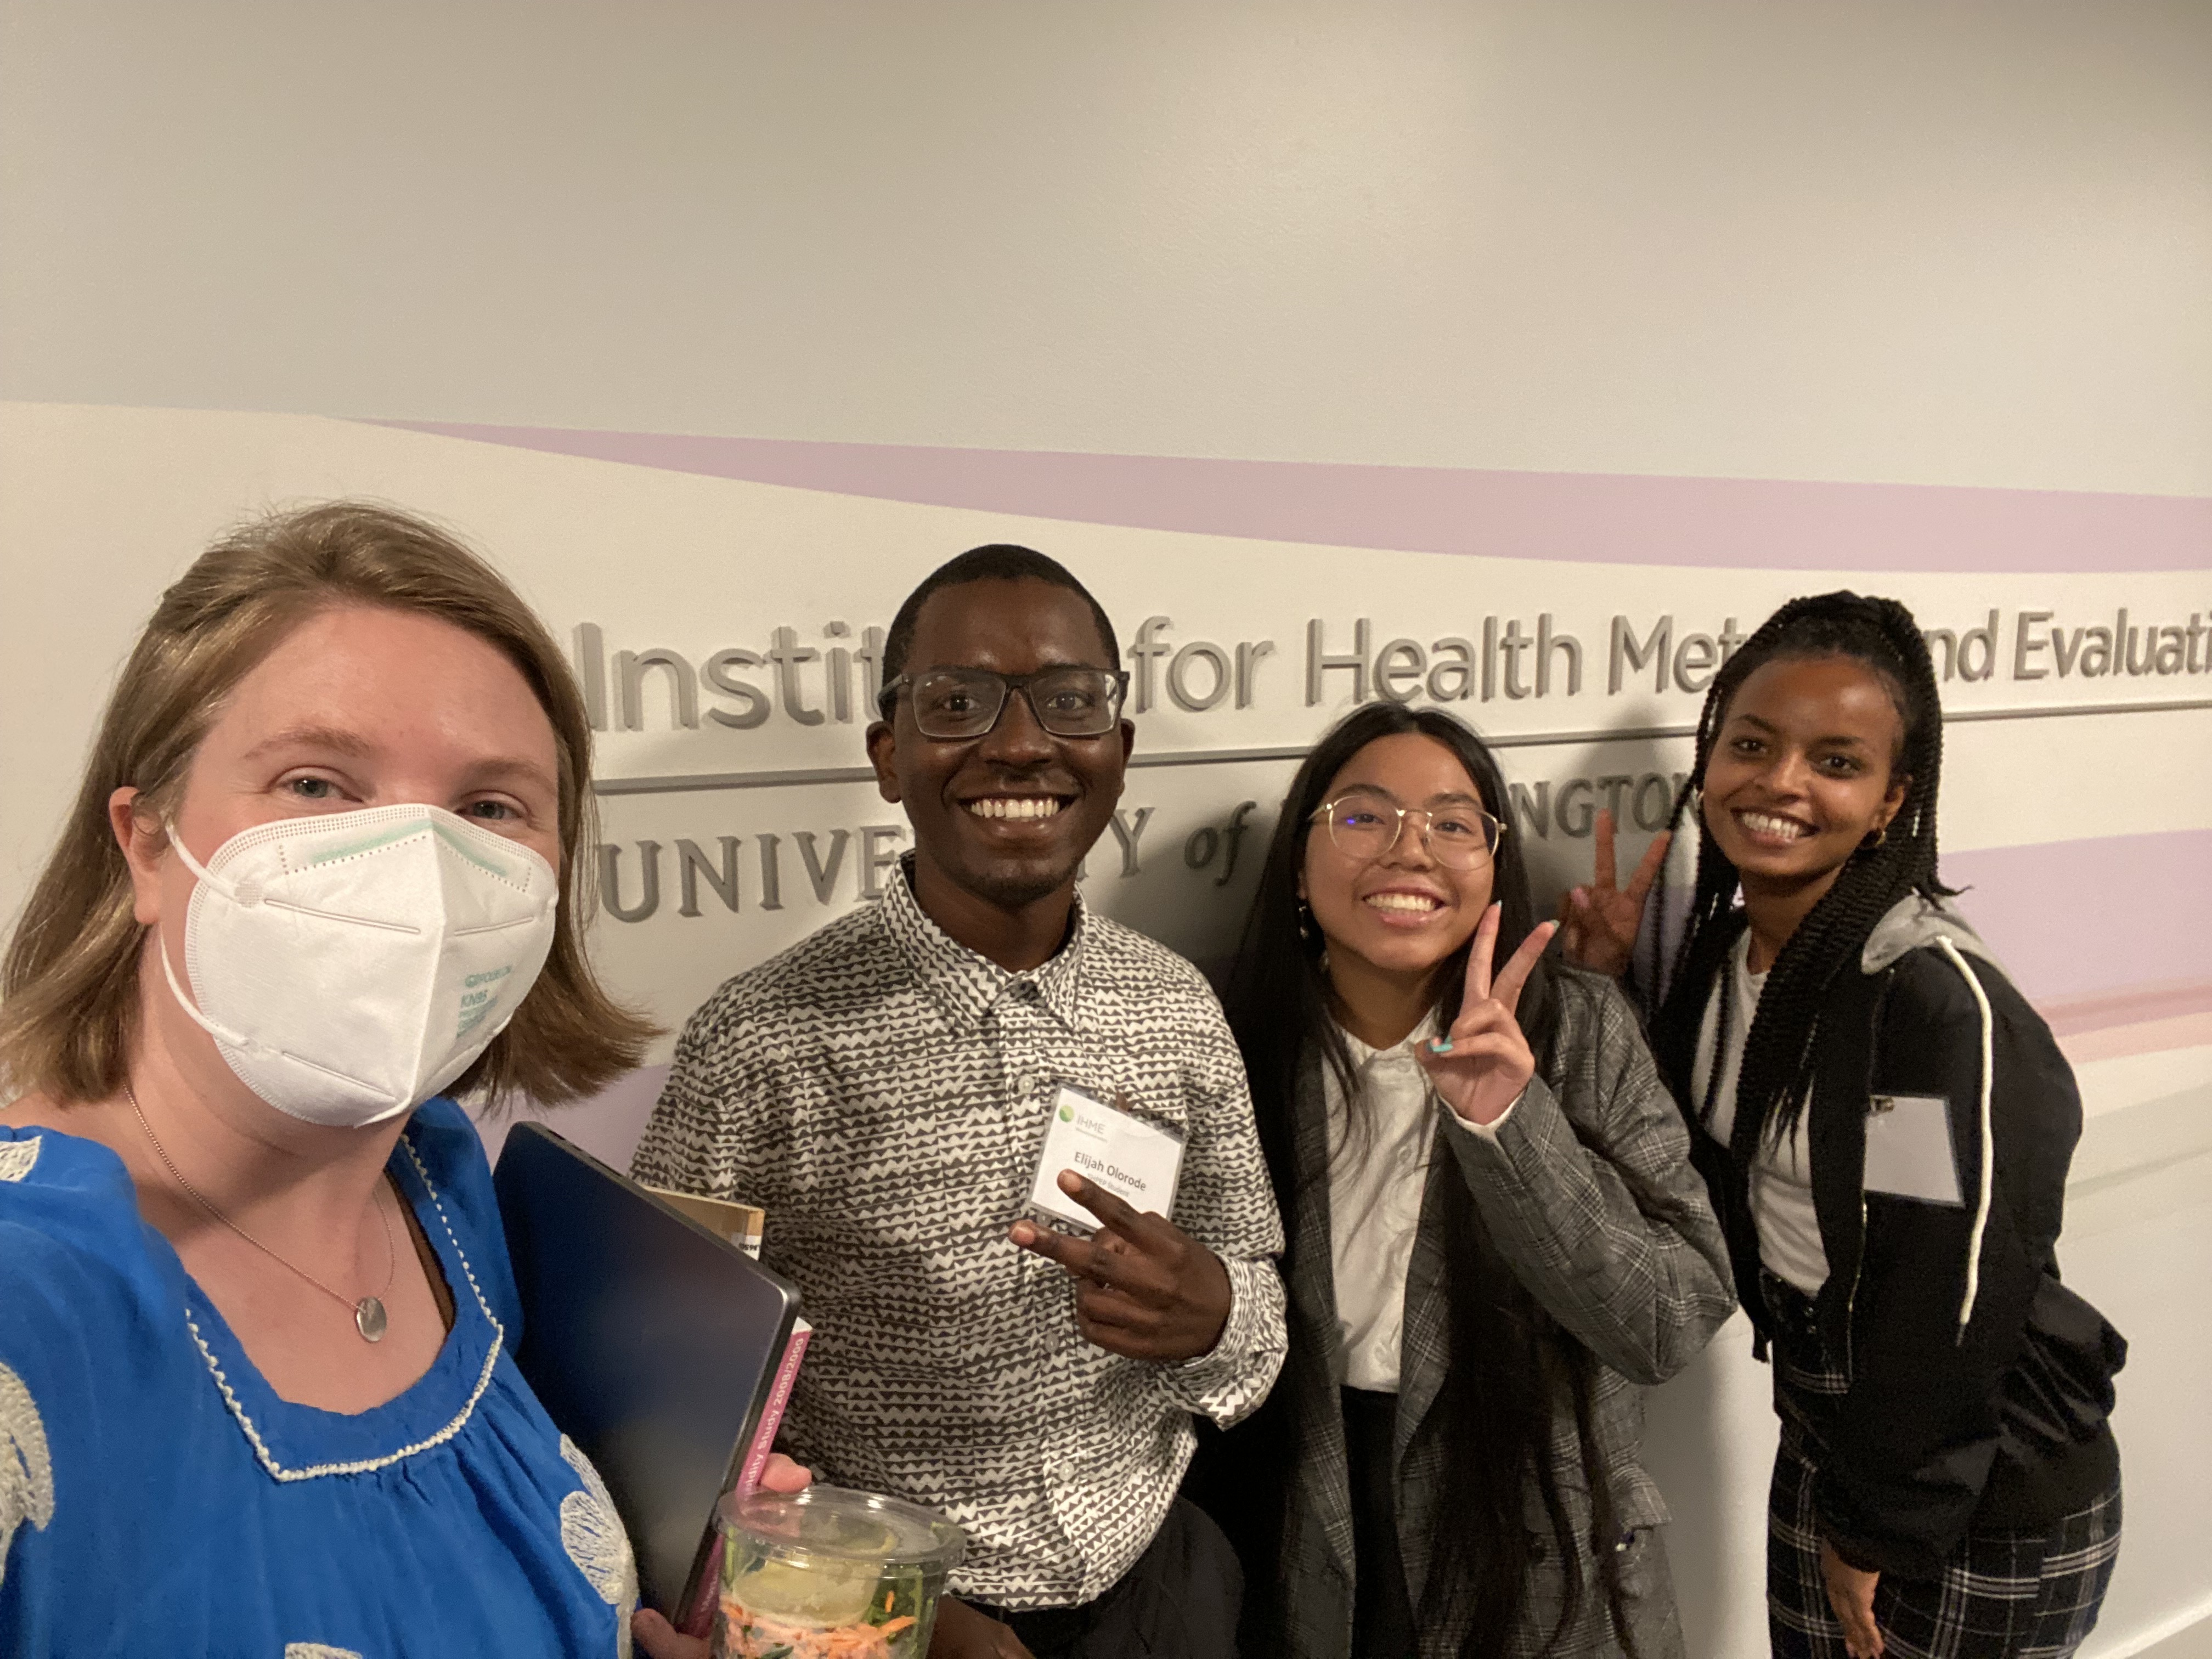 A diverse group of students stands in front of a sign a the IHME office